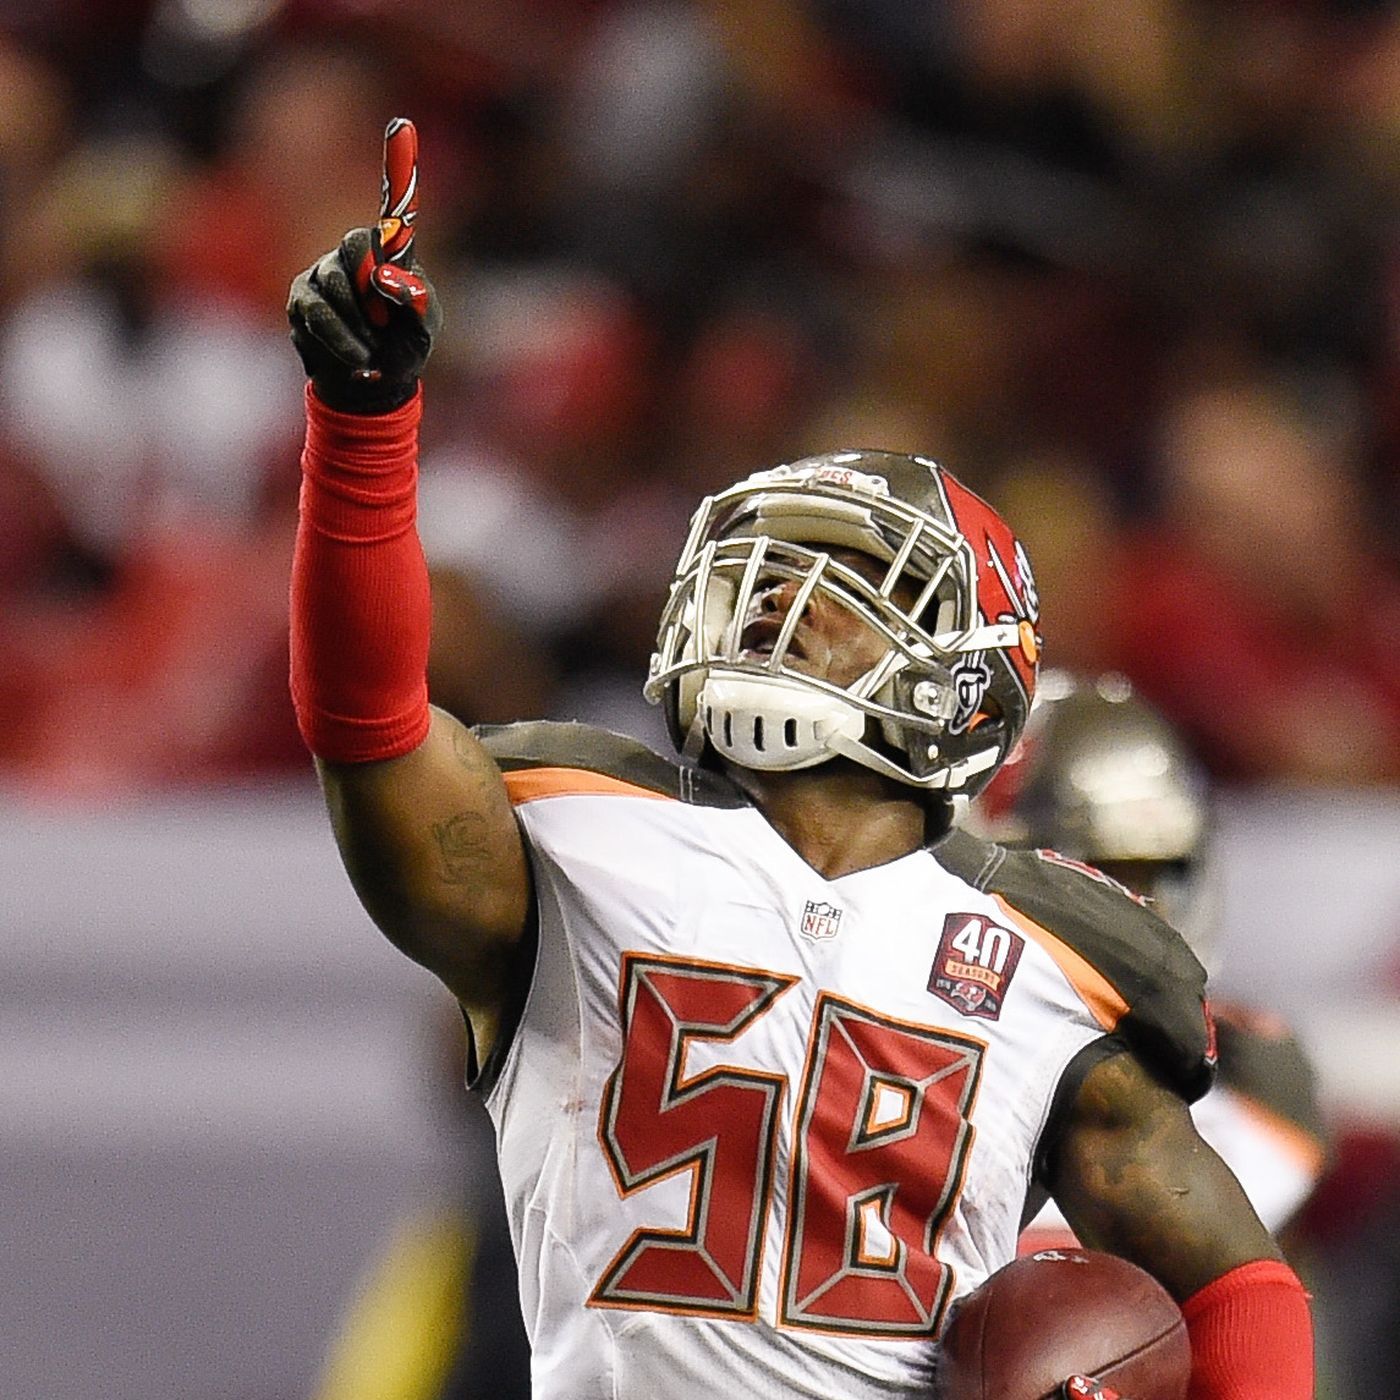 Bucs rookie LB Kwon Alexander suspended 4 games for PED violation